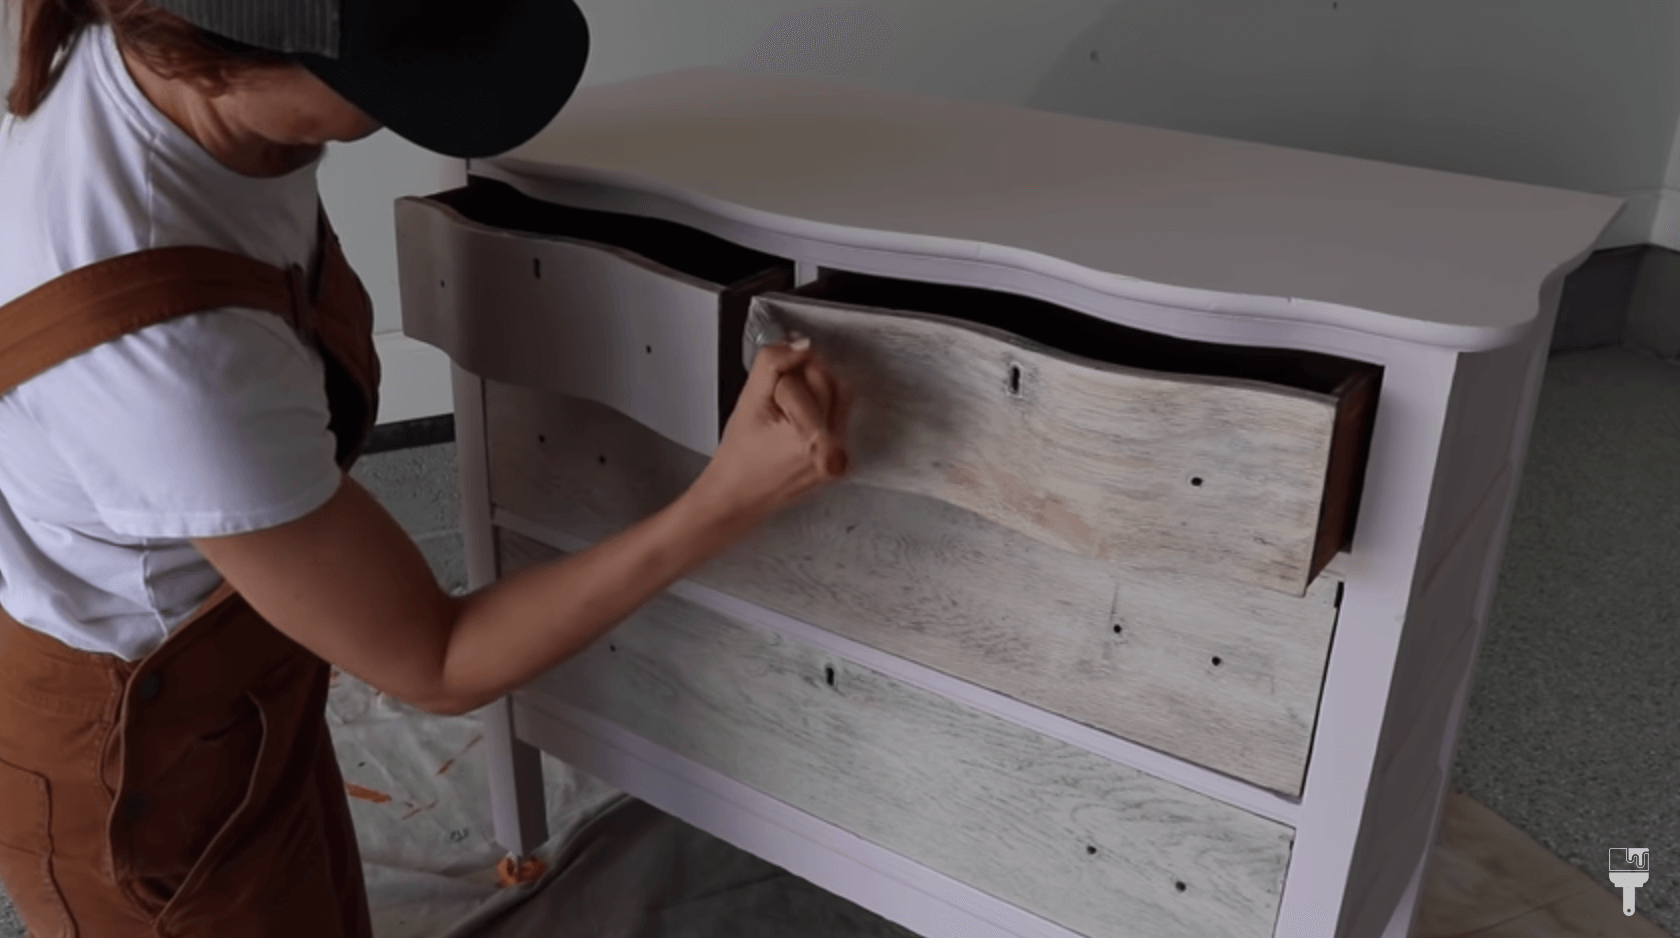 Country Chic Paint is a trusted small business paint brand amongst my  furniture flipping friends. This was the first project where I used their  products, and I can see what the hype